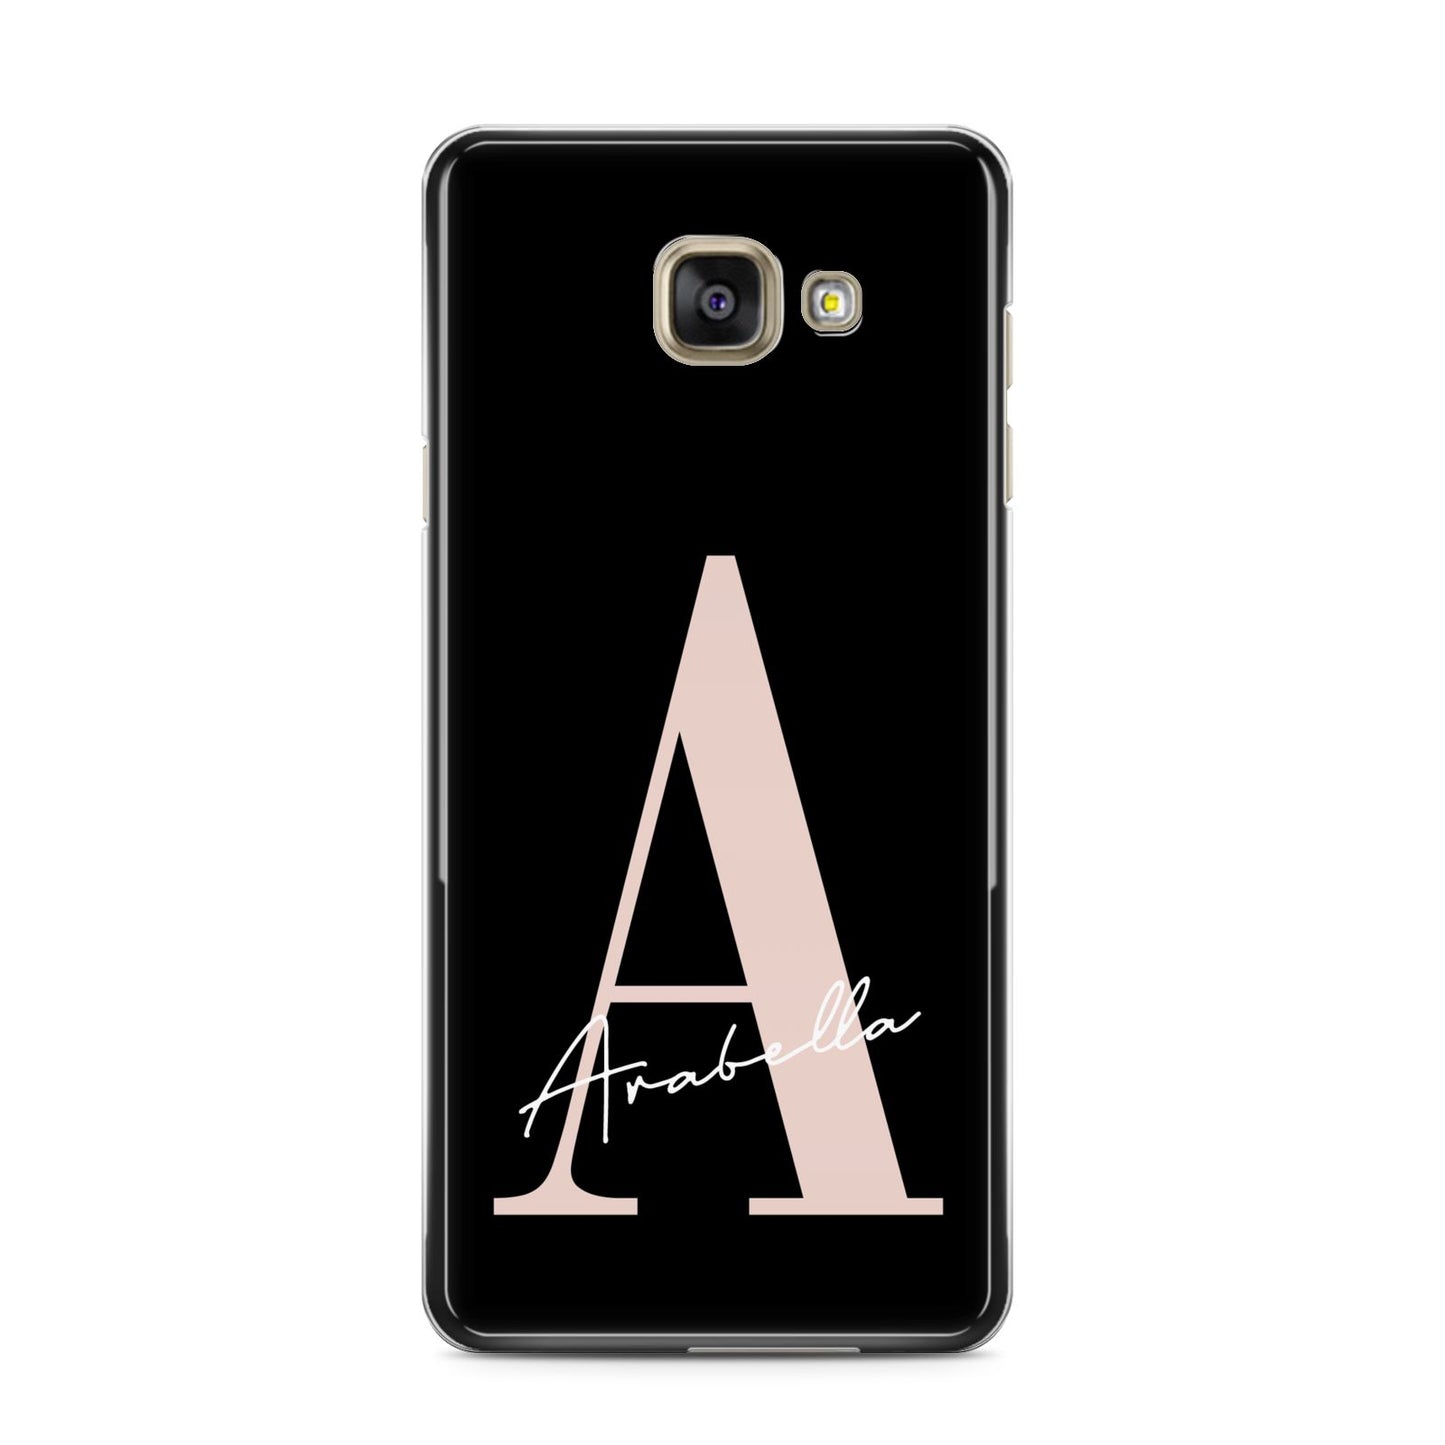 Personalised Black Pink Initial Samsung Galaxy A3 2016 Case on gold phone